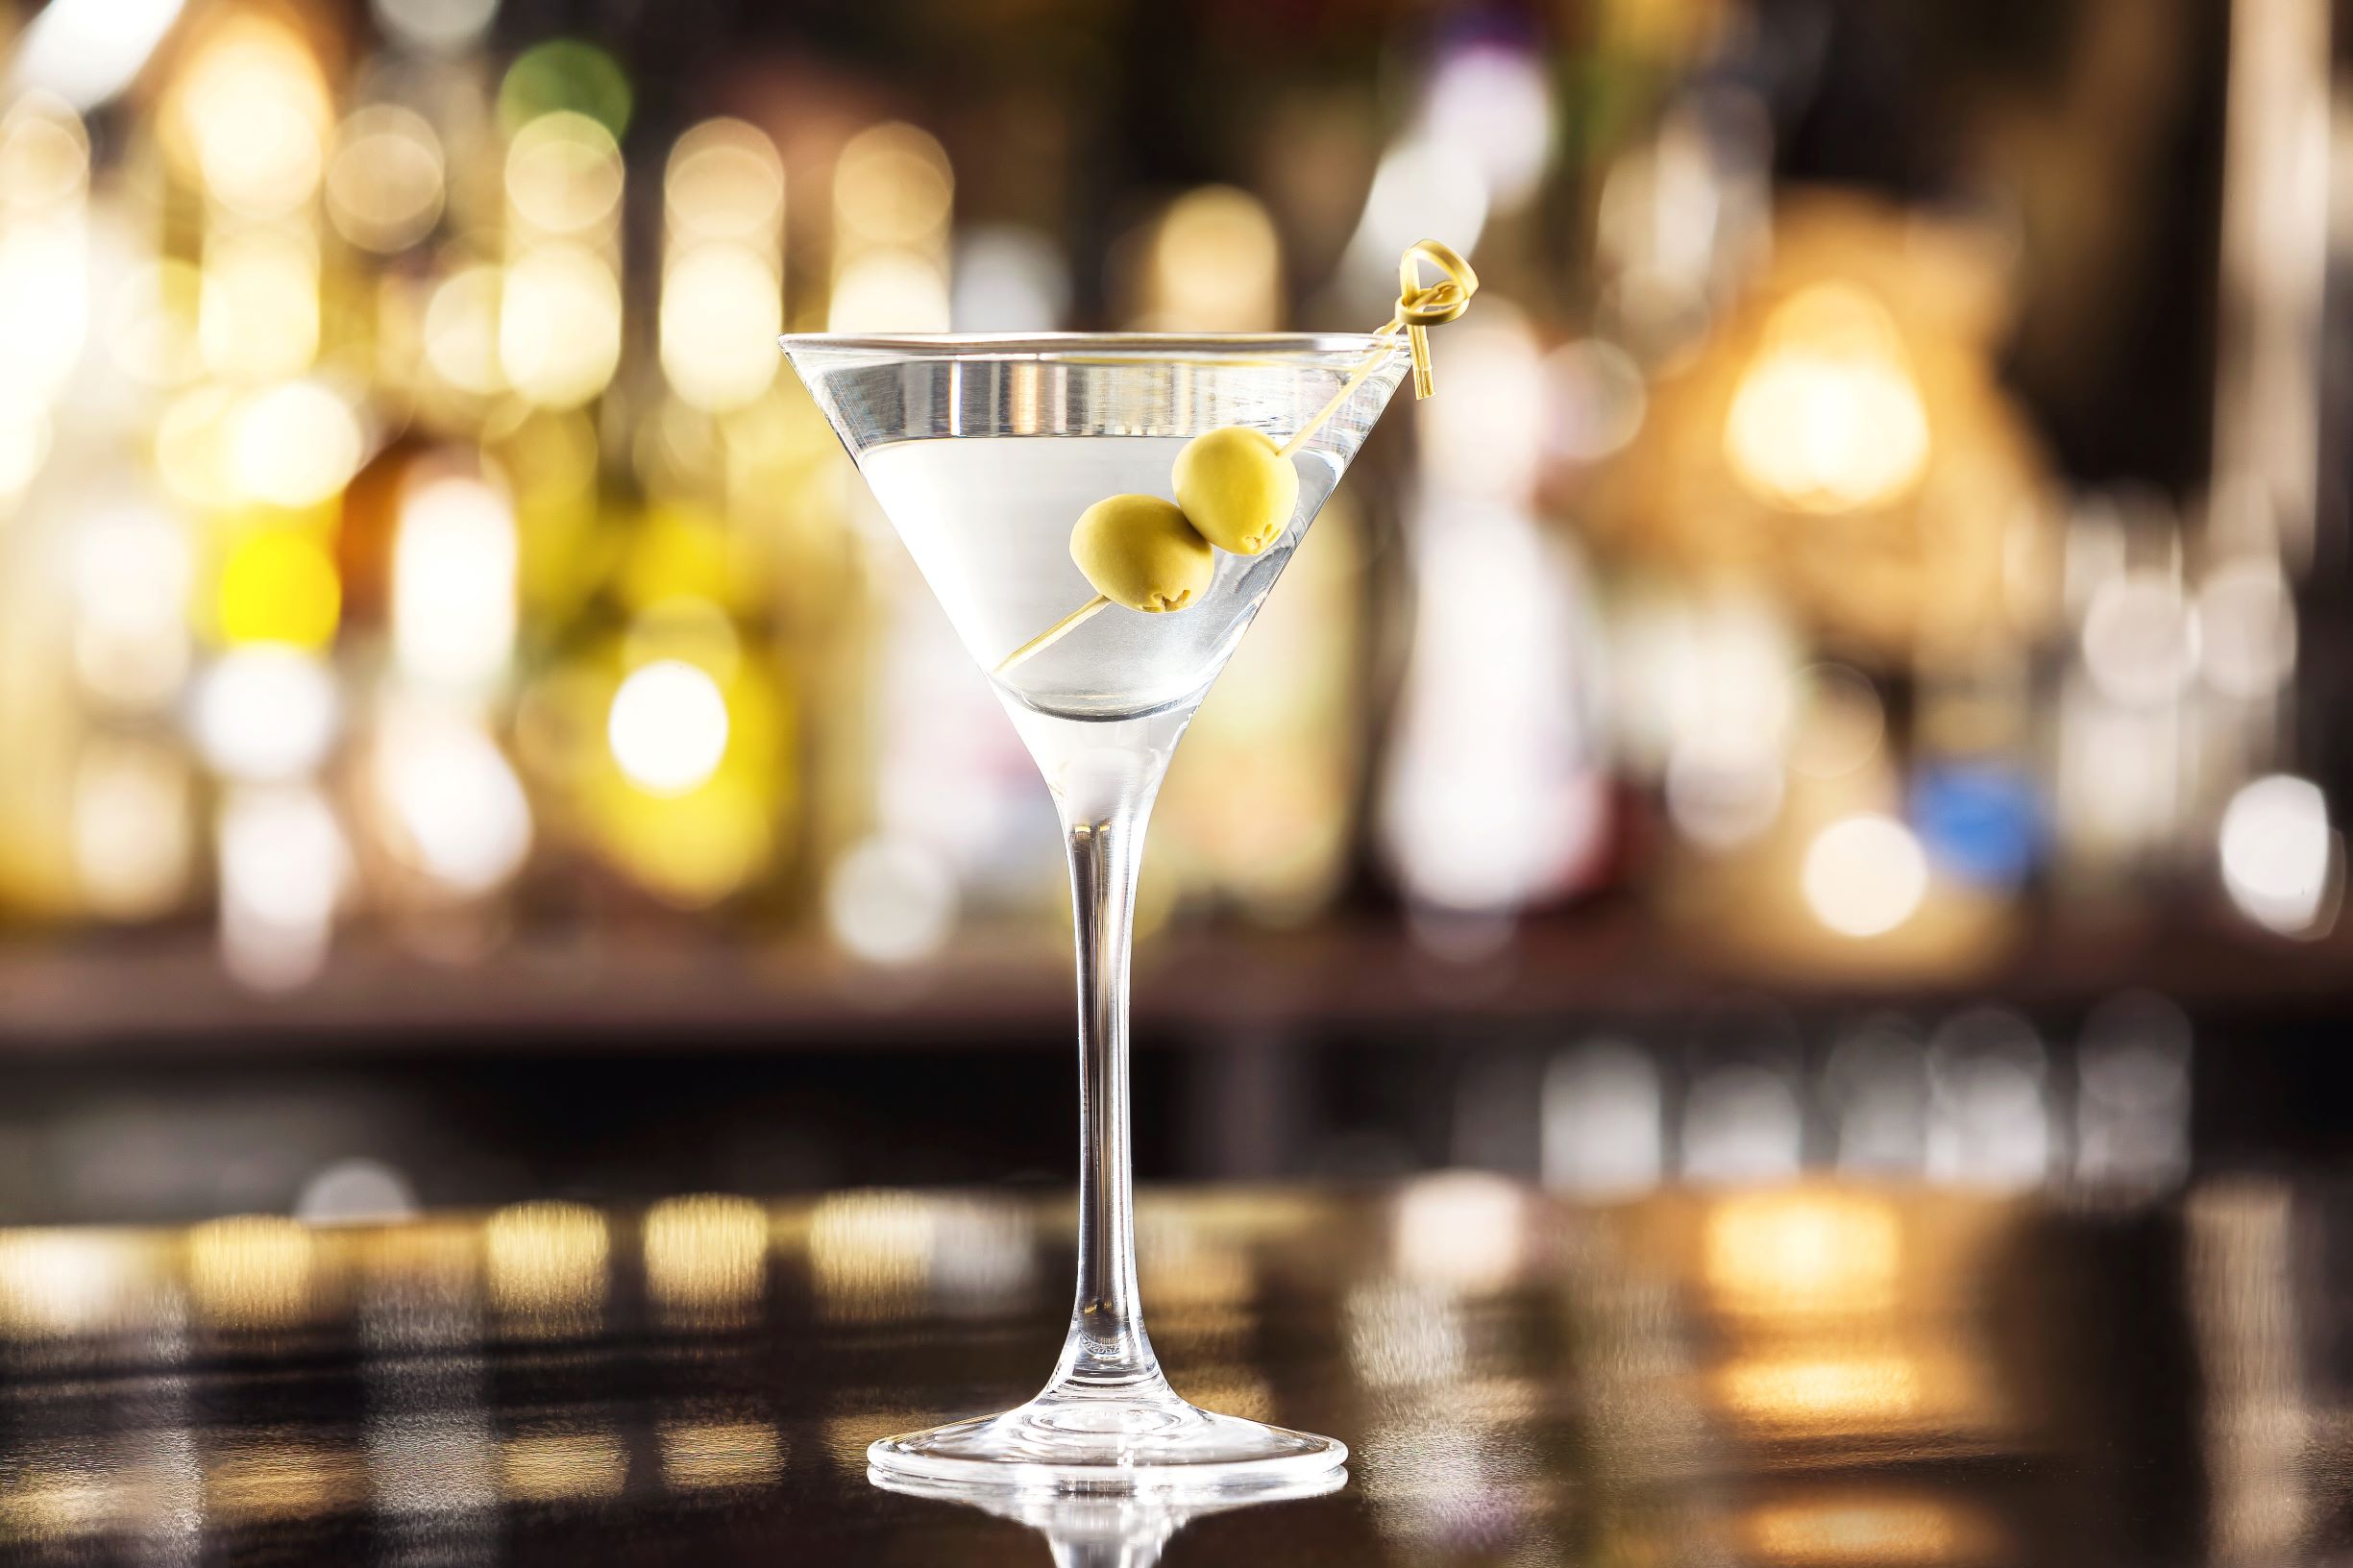 Martini glass with olives with a classy bar in the background